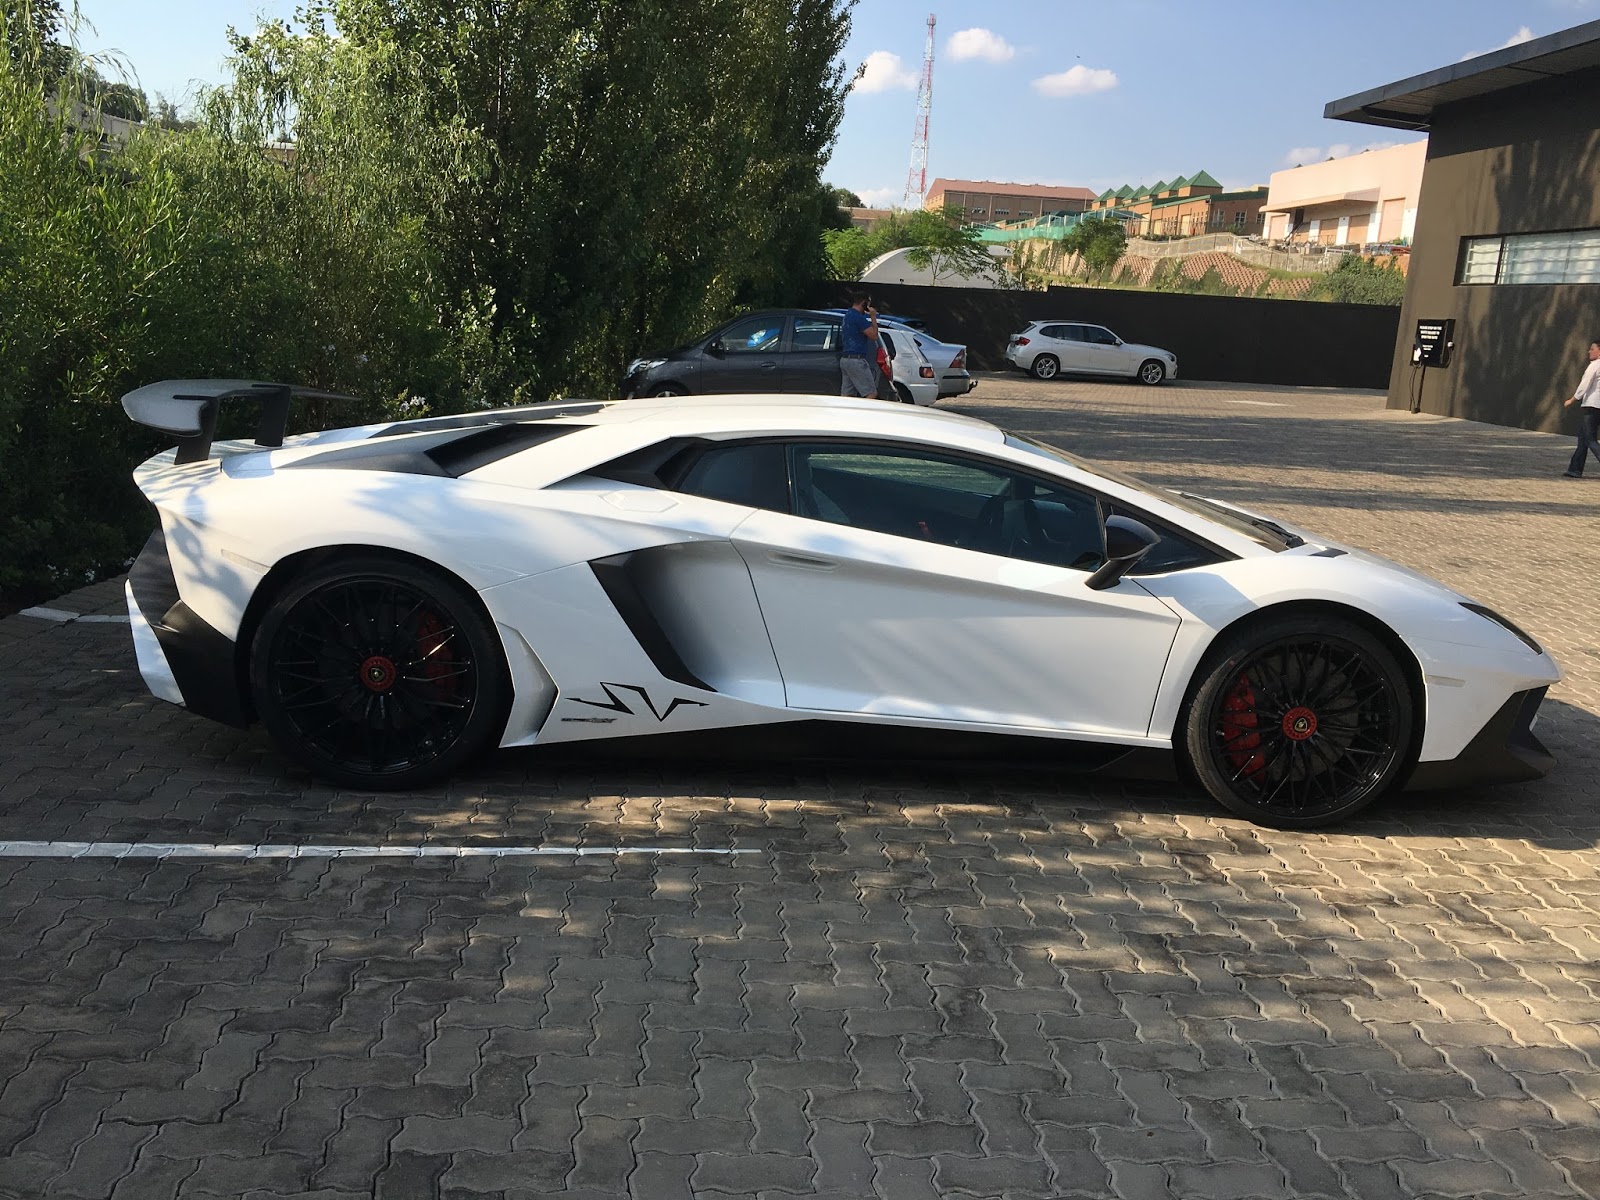 The First Lamborghini Aventador SV Has Arrived in South Africa